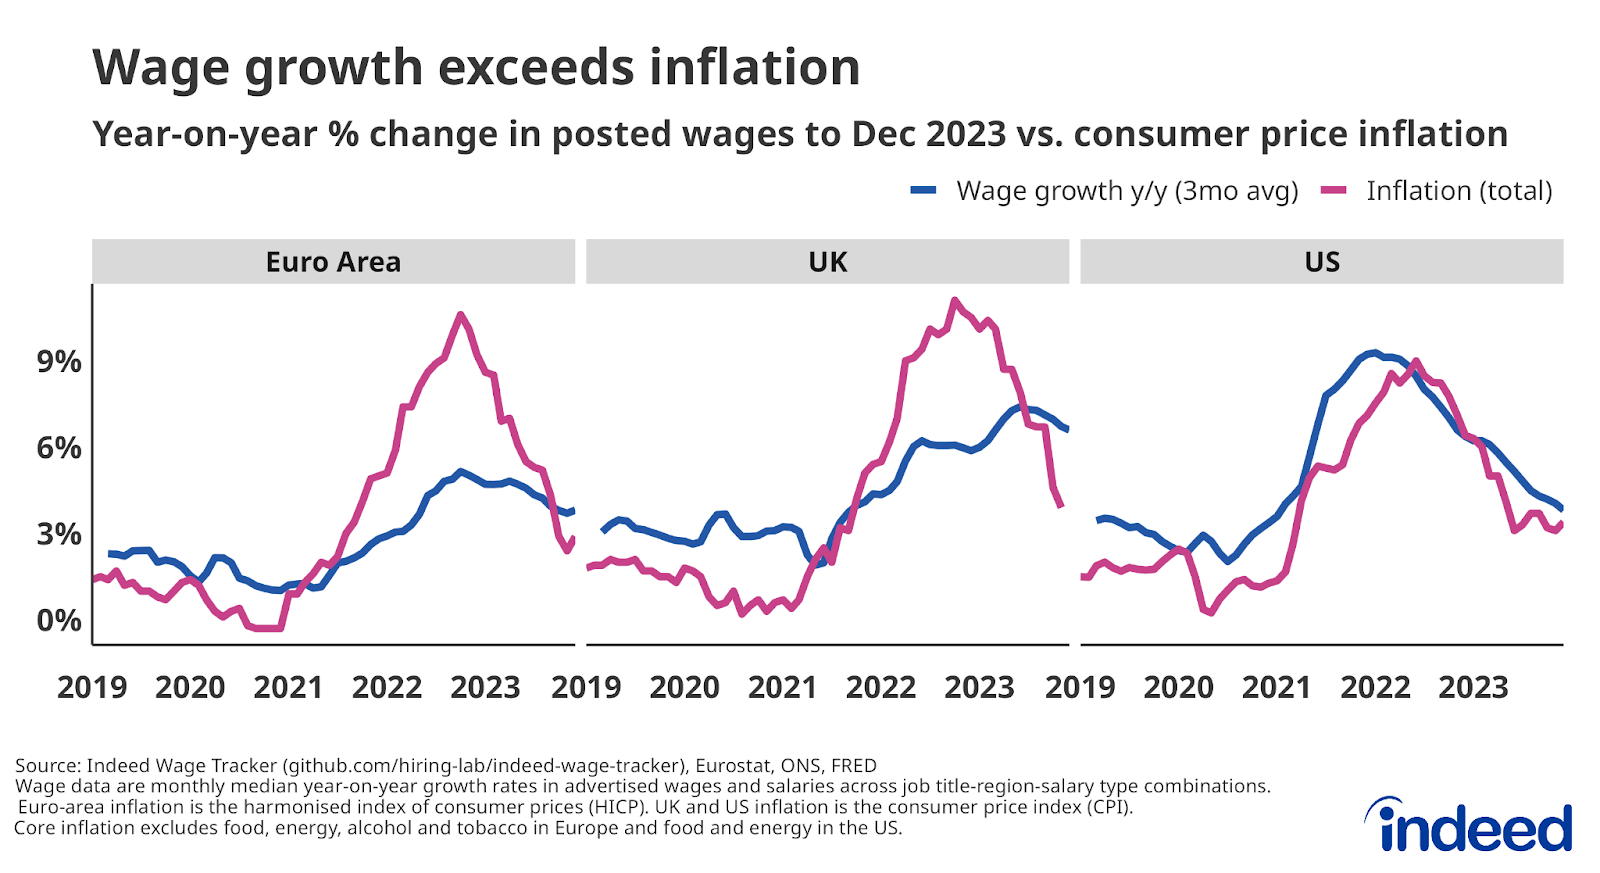 Series of line charts titled “Wage growth exceeds inflation”. These three charts show the year-on-year percentage change in nominal wages in job postings from January 2019 to December 2023 for the euro area, the UK, and the US, plotted against consumer price inflation.